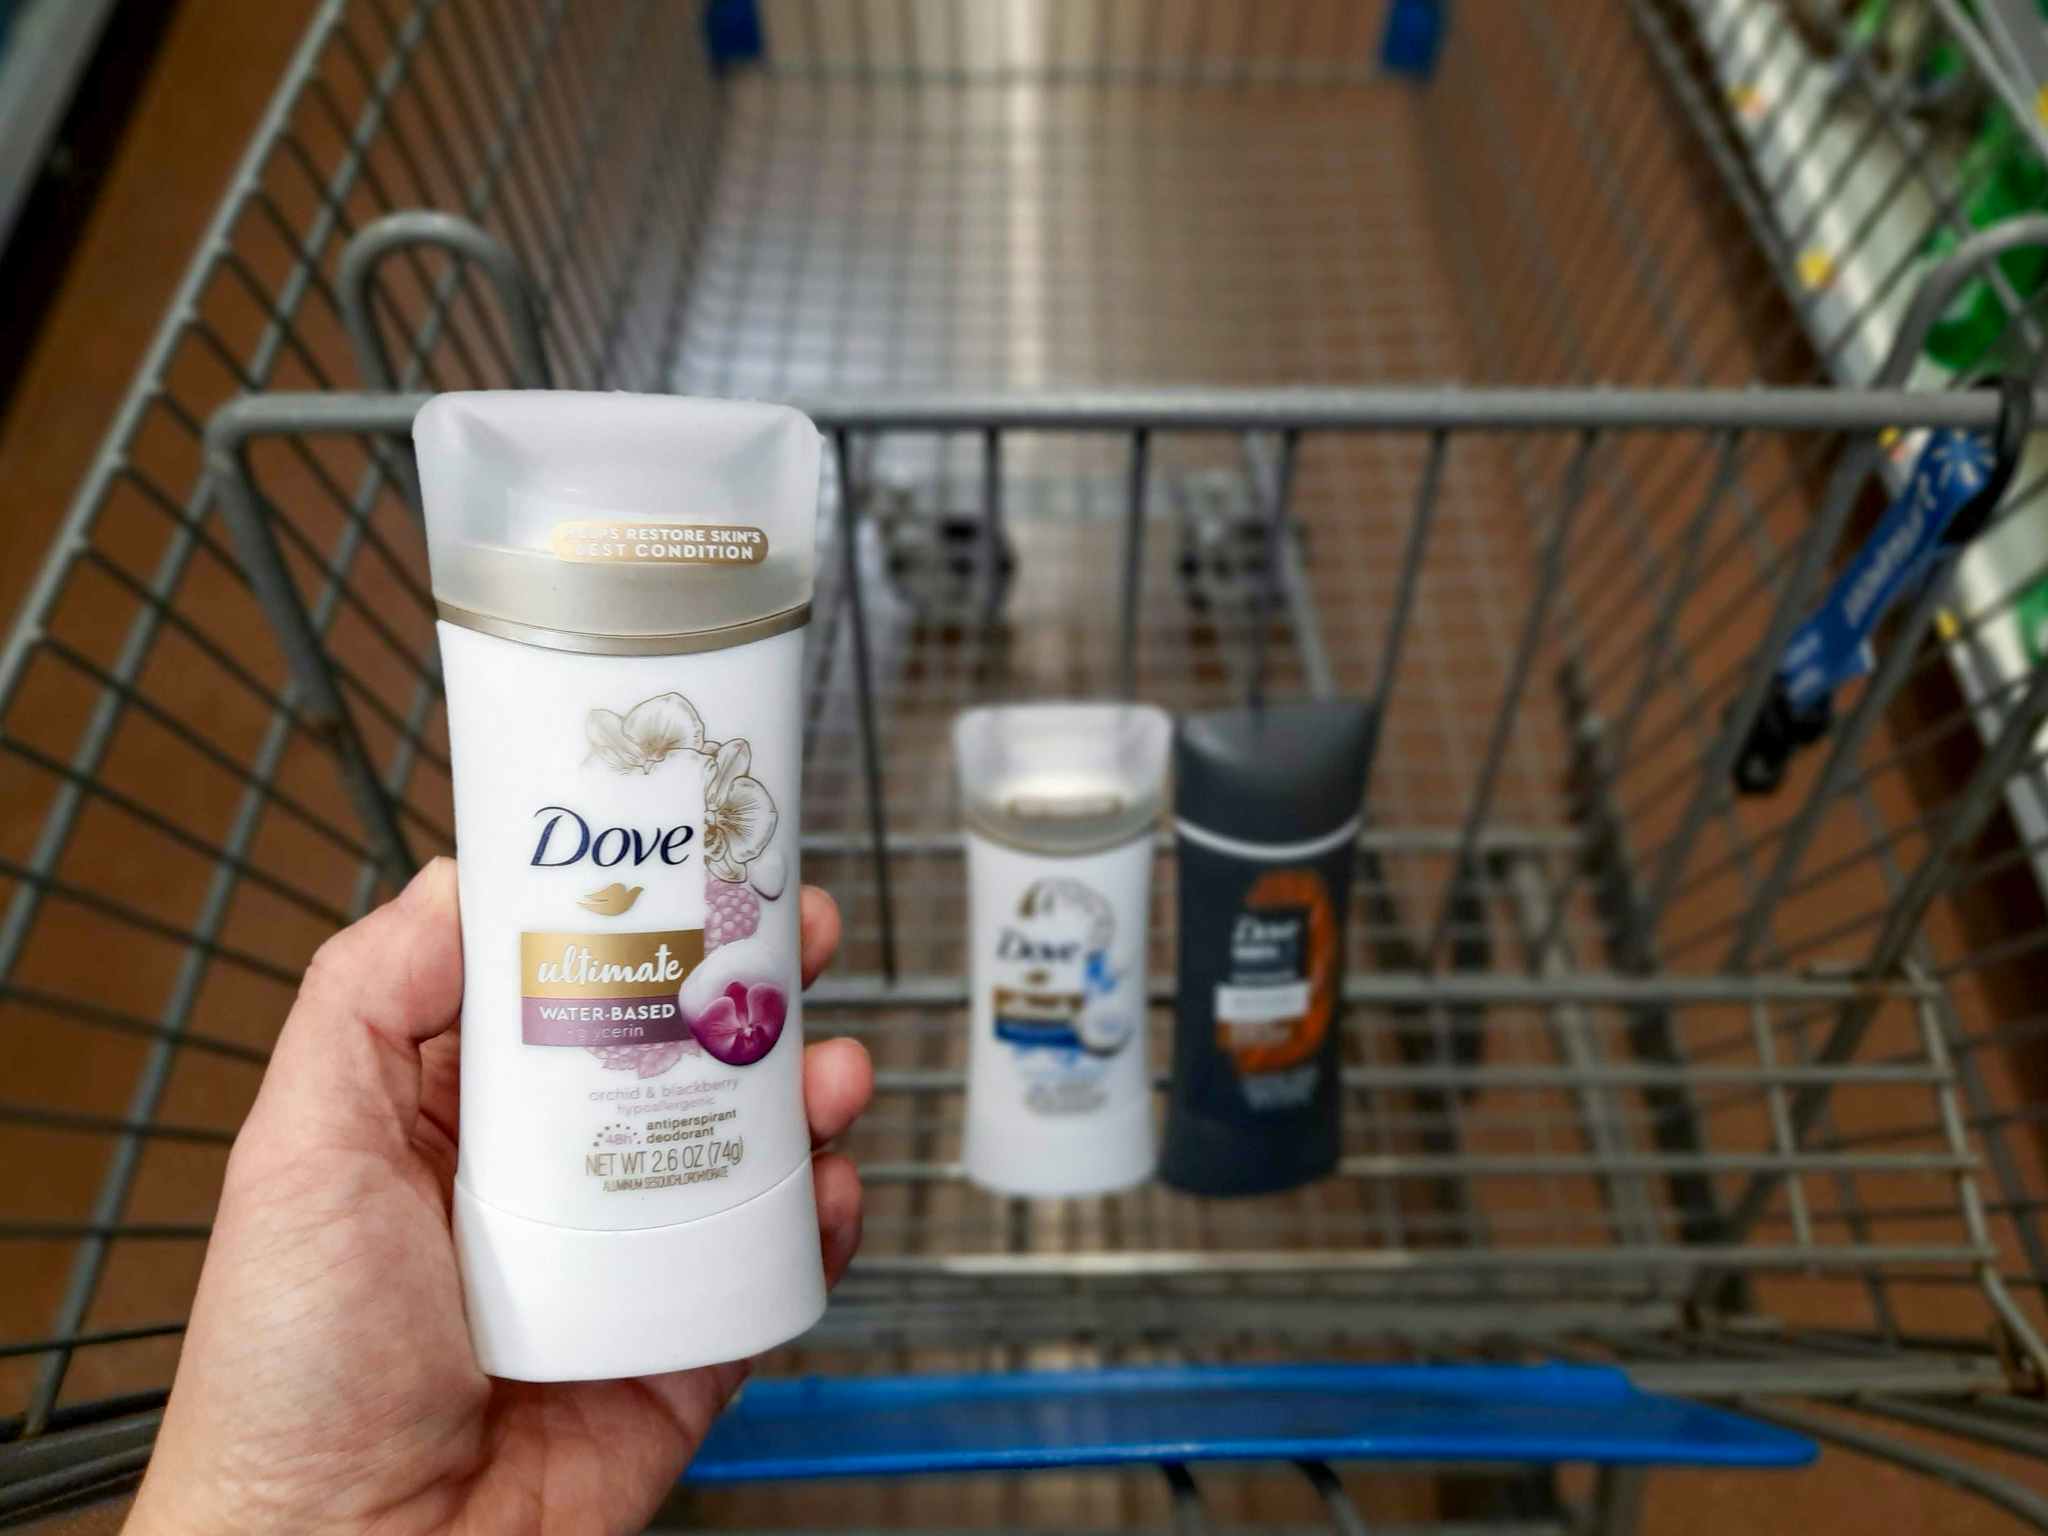 One Dove Ultimate Deodorant product held over Walmart shopping cart. The shopping cart also has two more Dove deodorant products inside it.